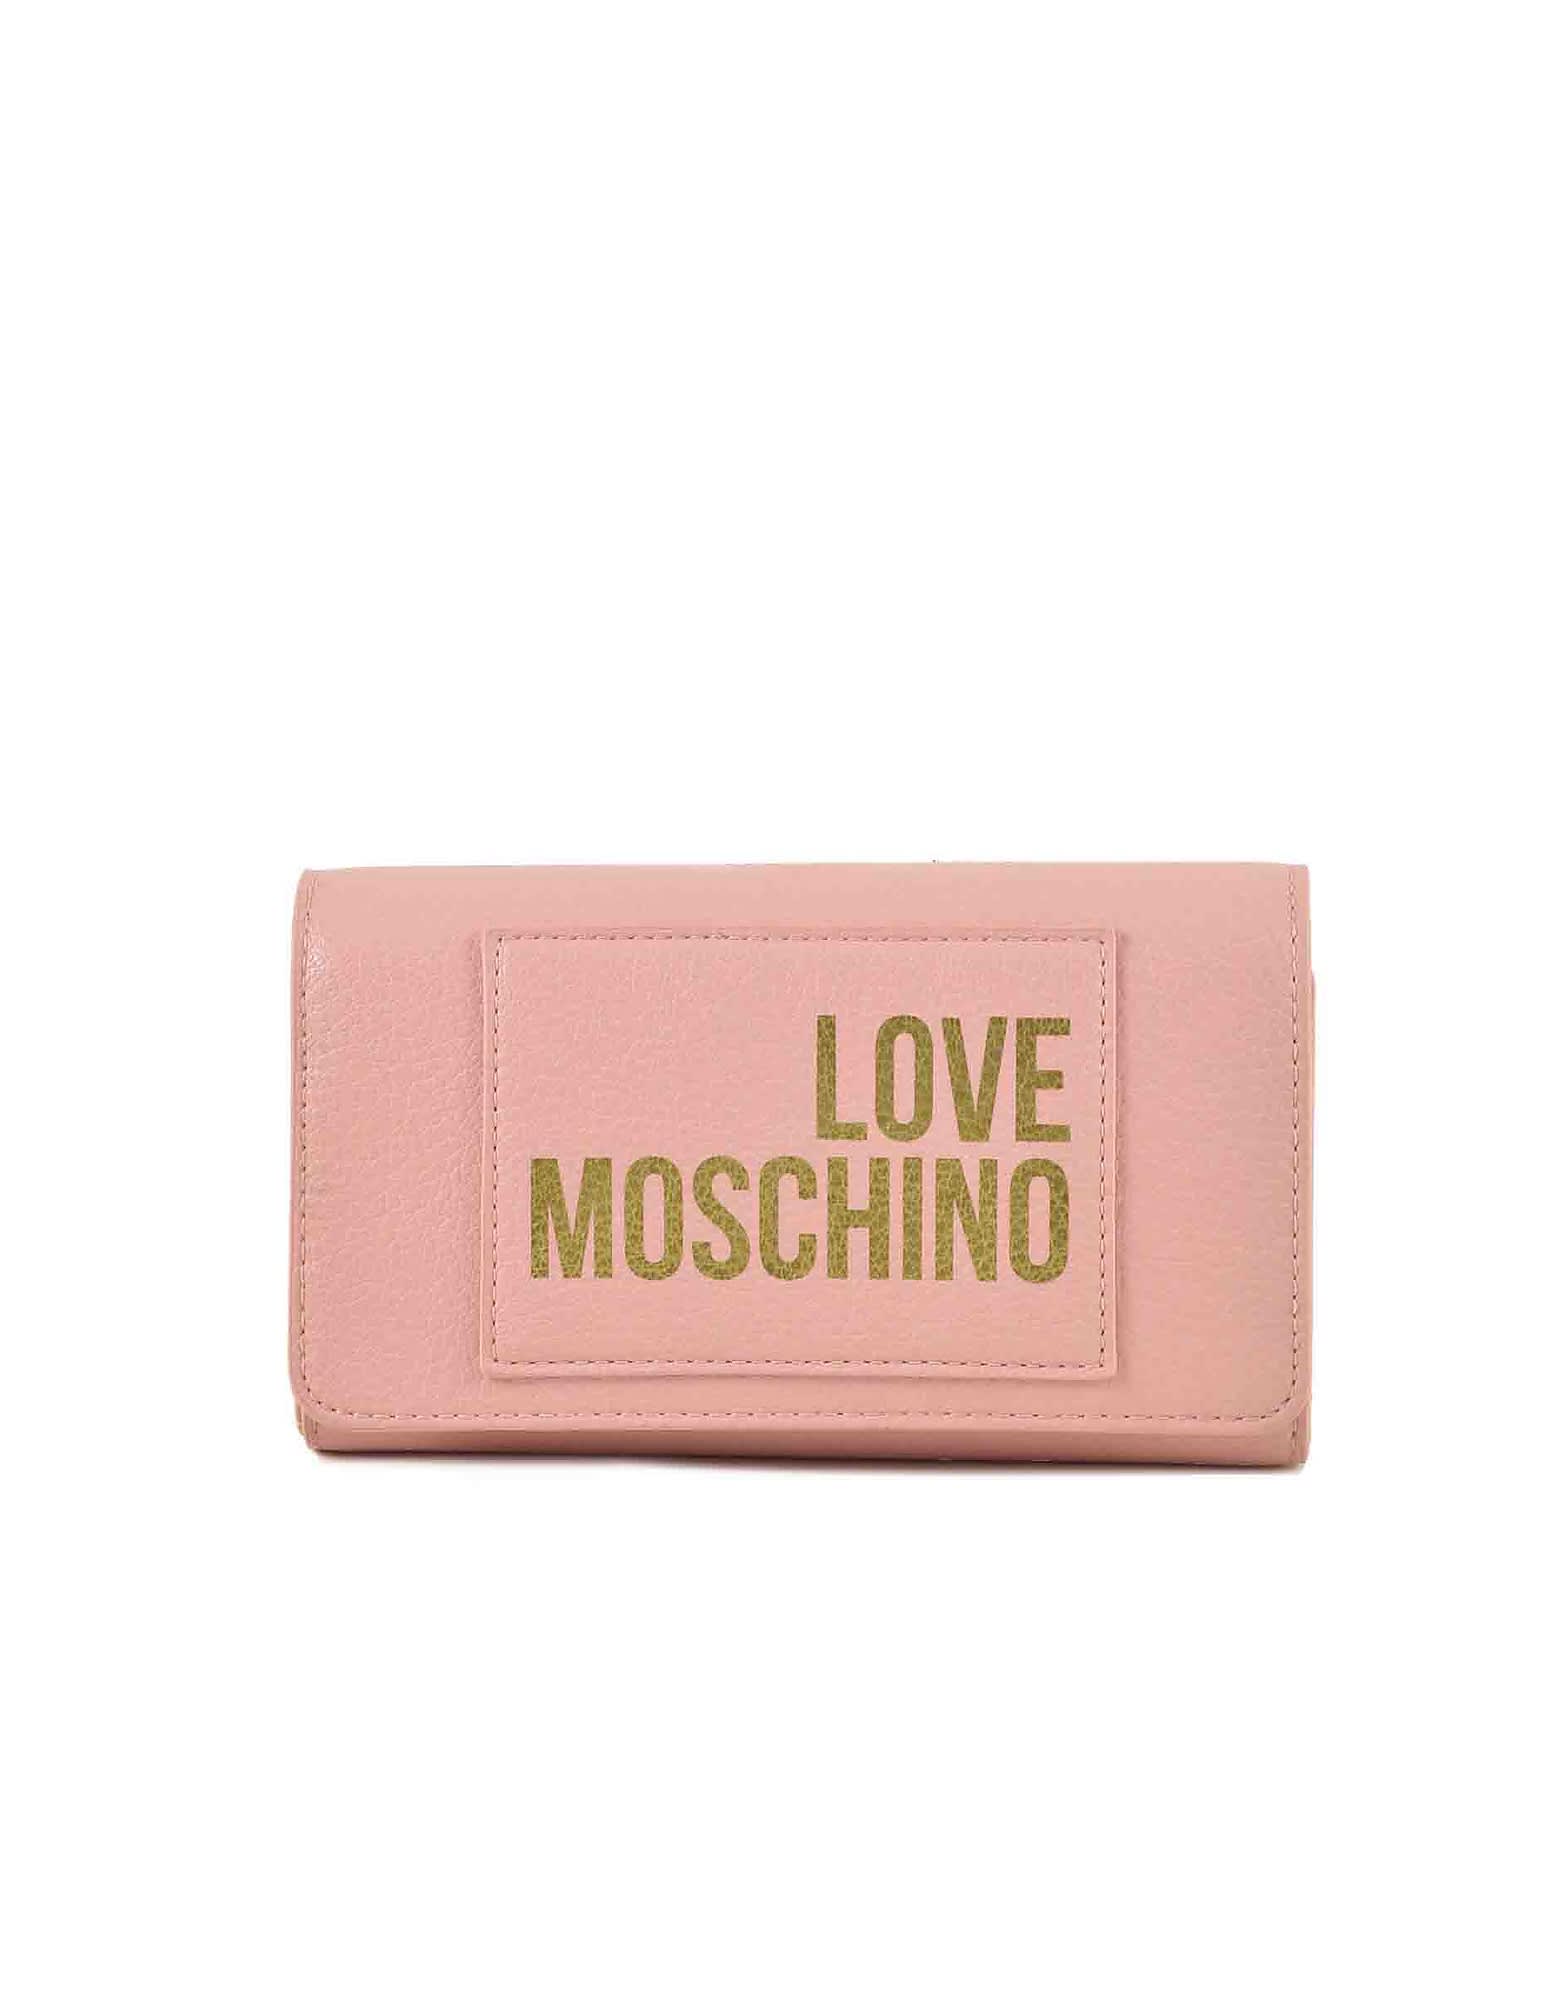 Love Moschino Womens Pink Wallet